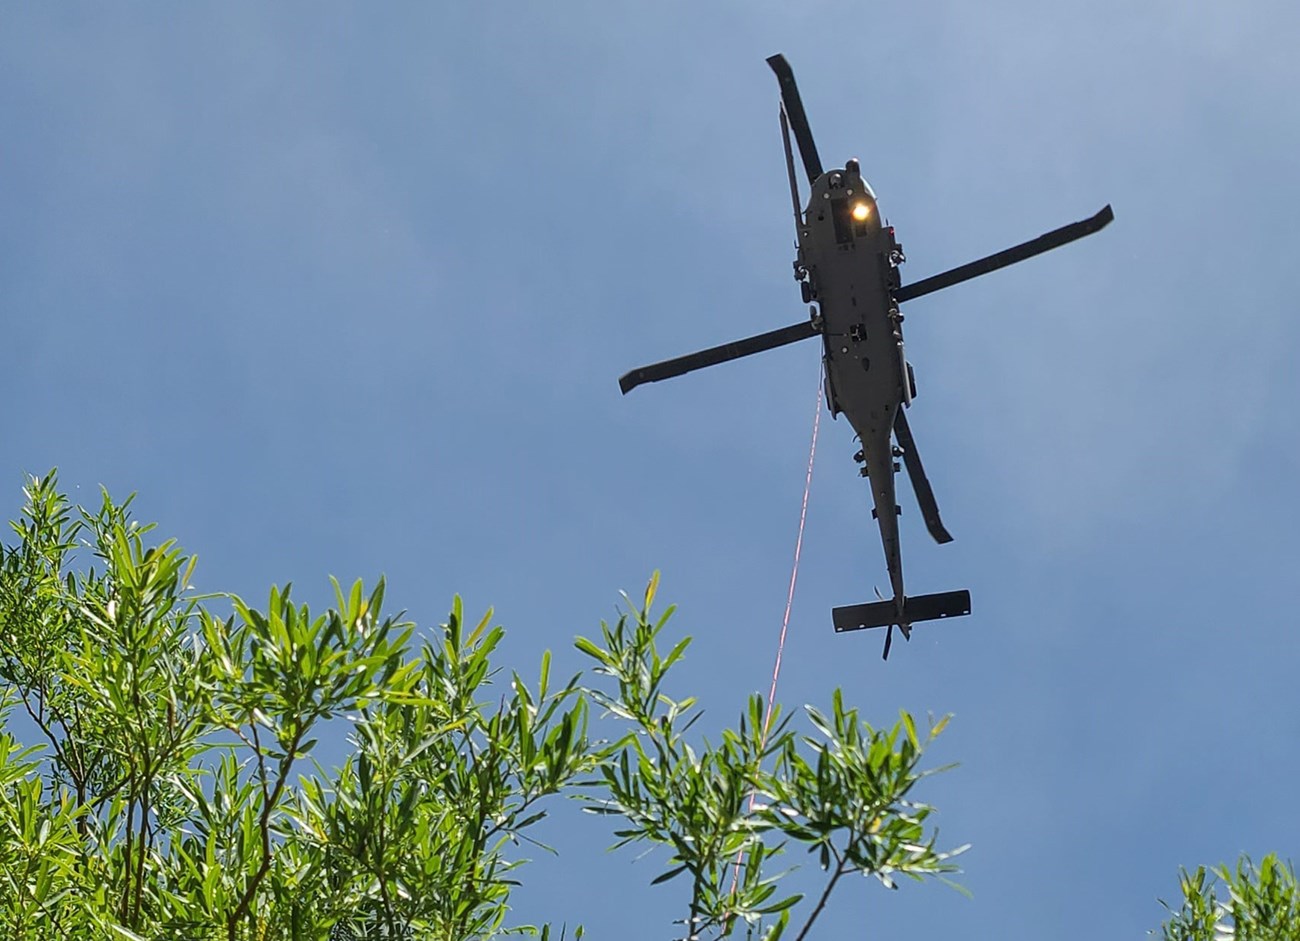 Helicopter flying against a blue sky, the image was taken through green leaves of some vegetation.